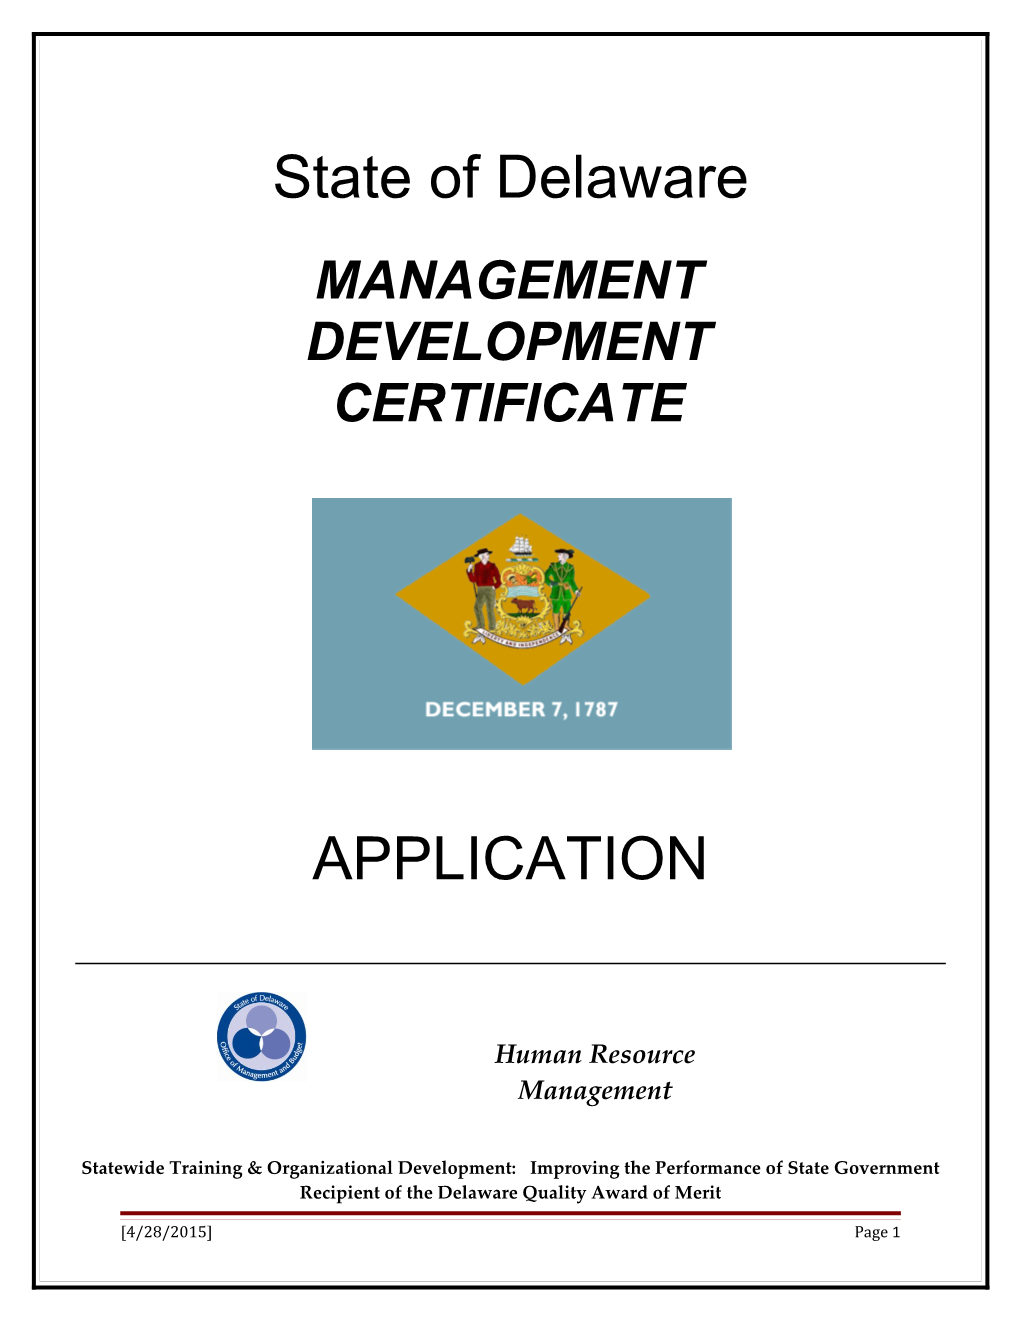 Statewide Training & Organizational Development: Improving the Performance of State Government